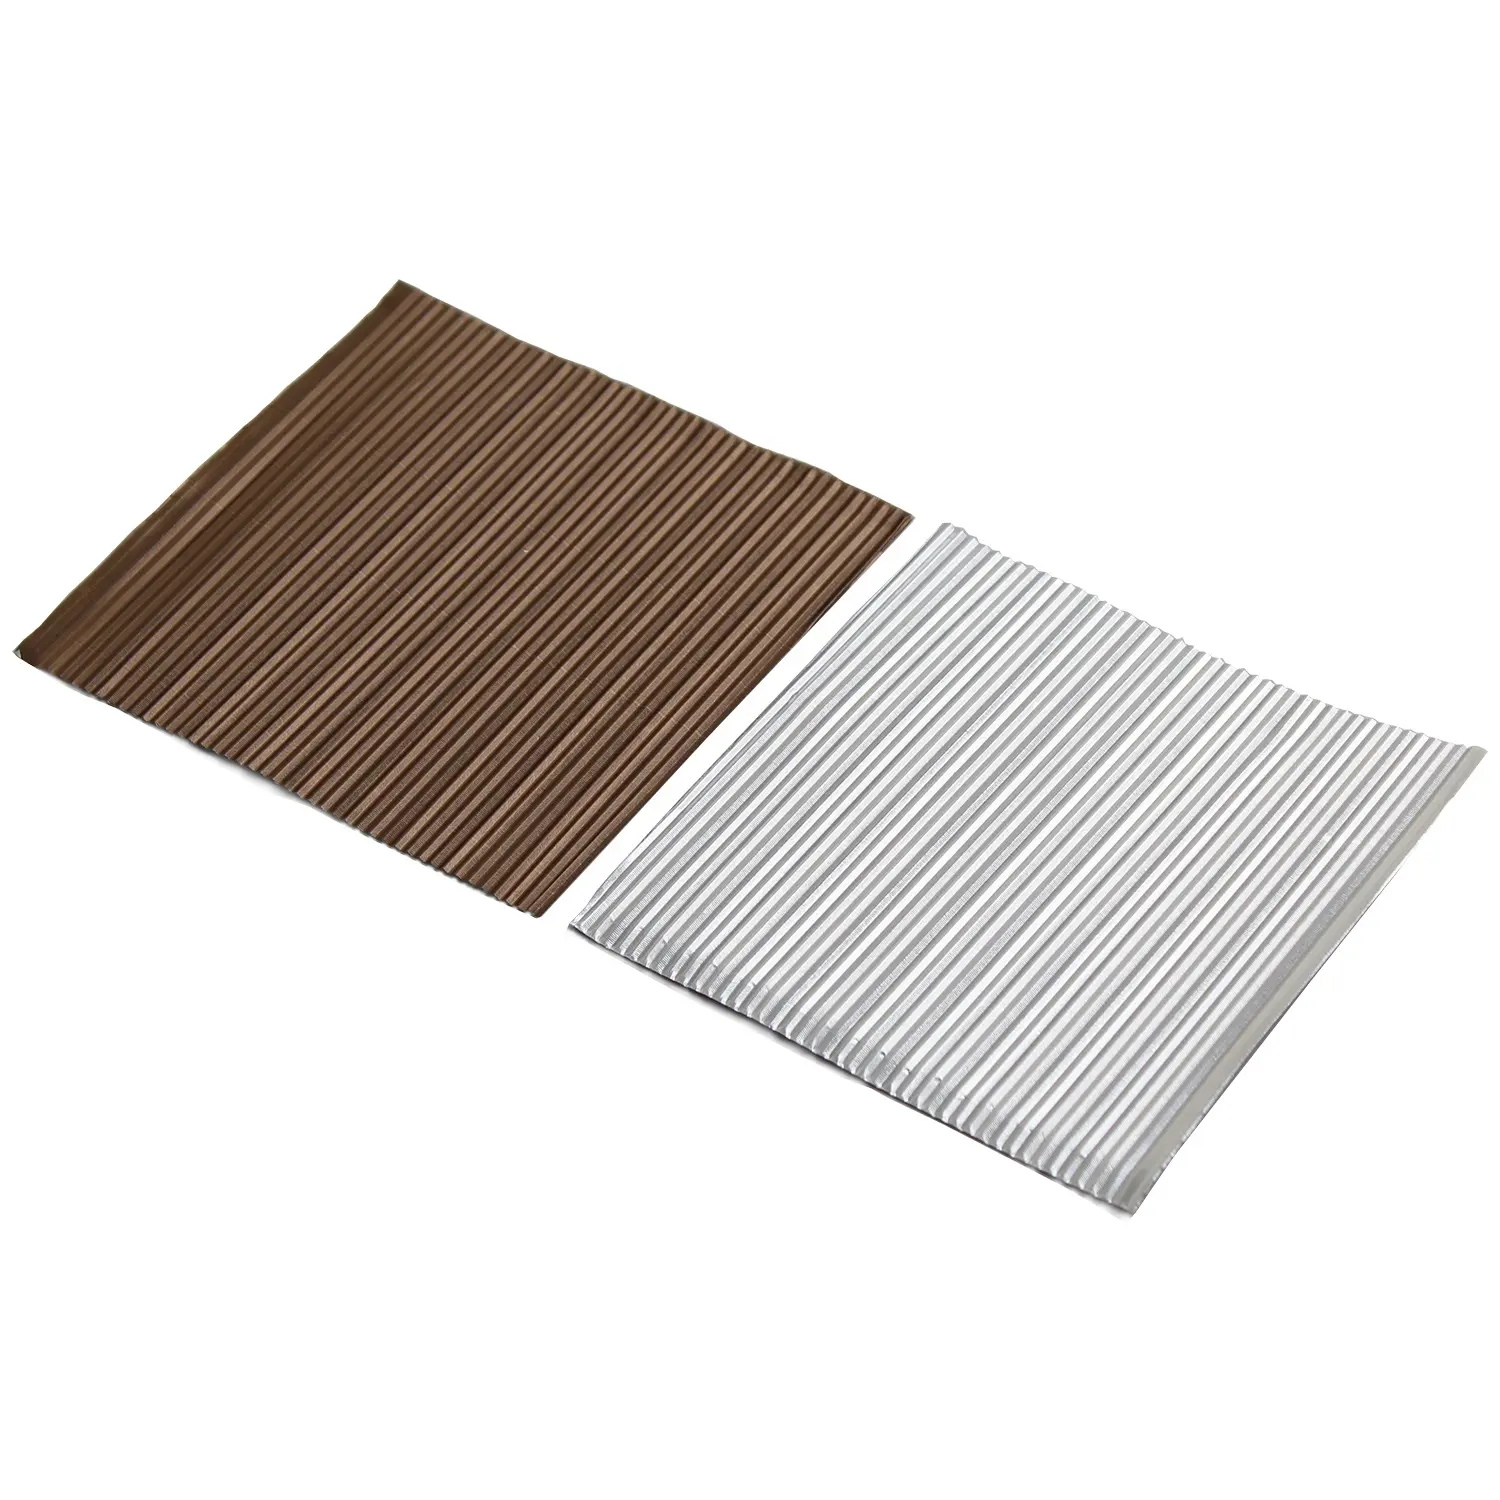 Chocolate packaging and wrapping paper laminated colored aluminum foil corrugated foil